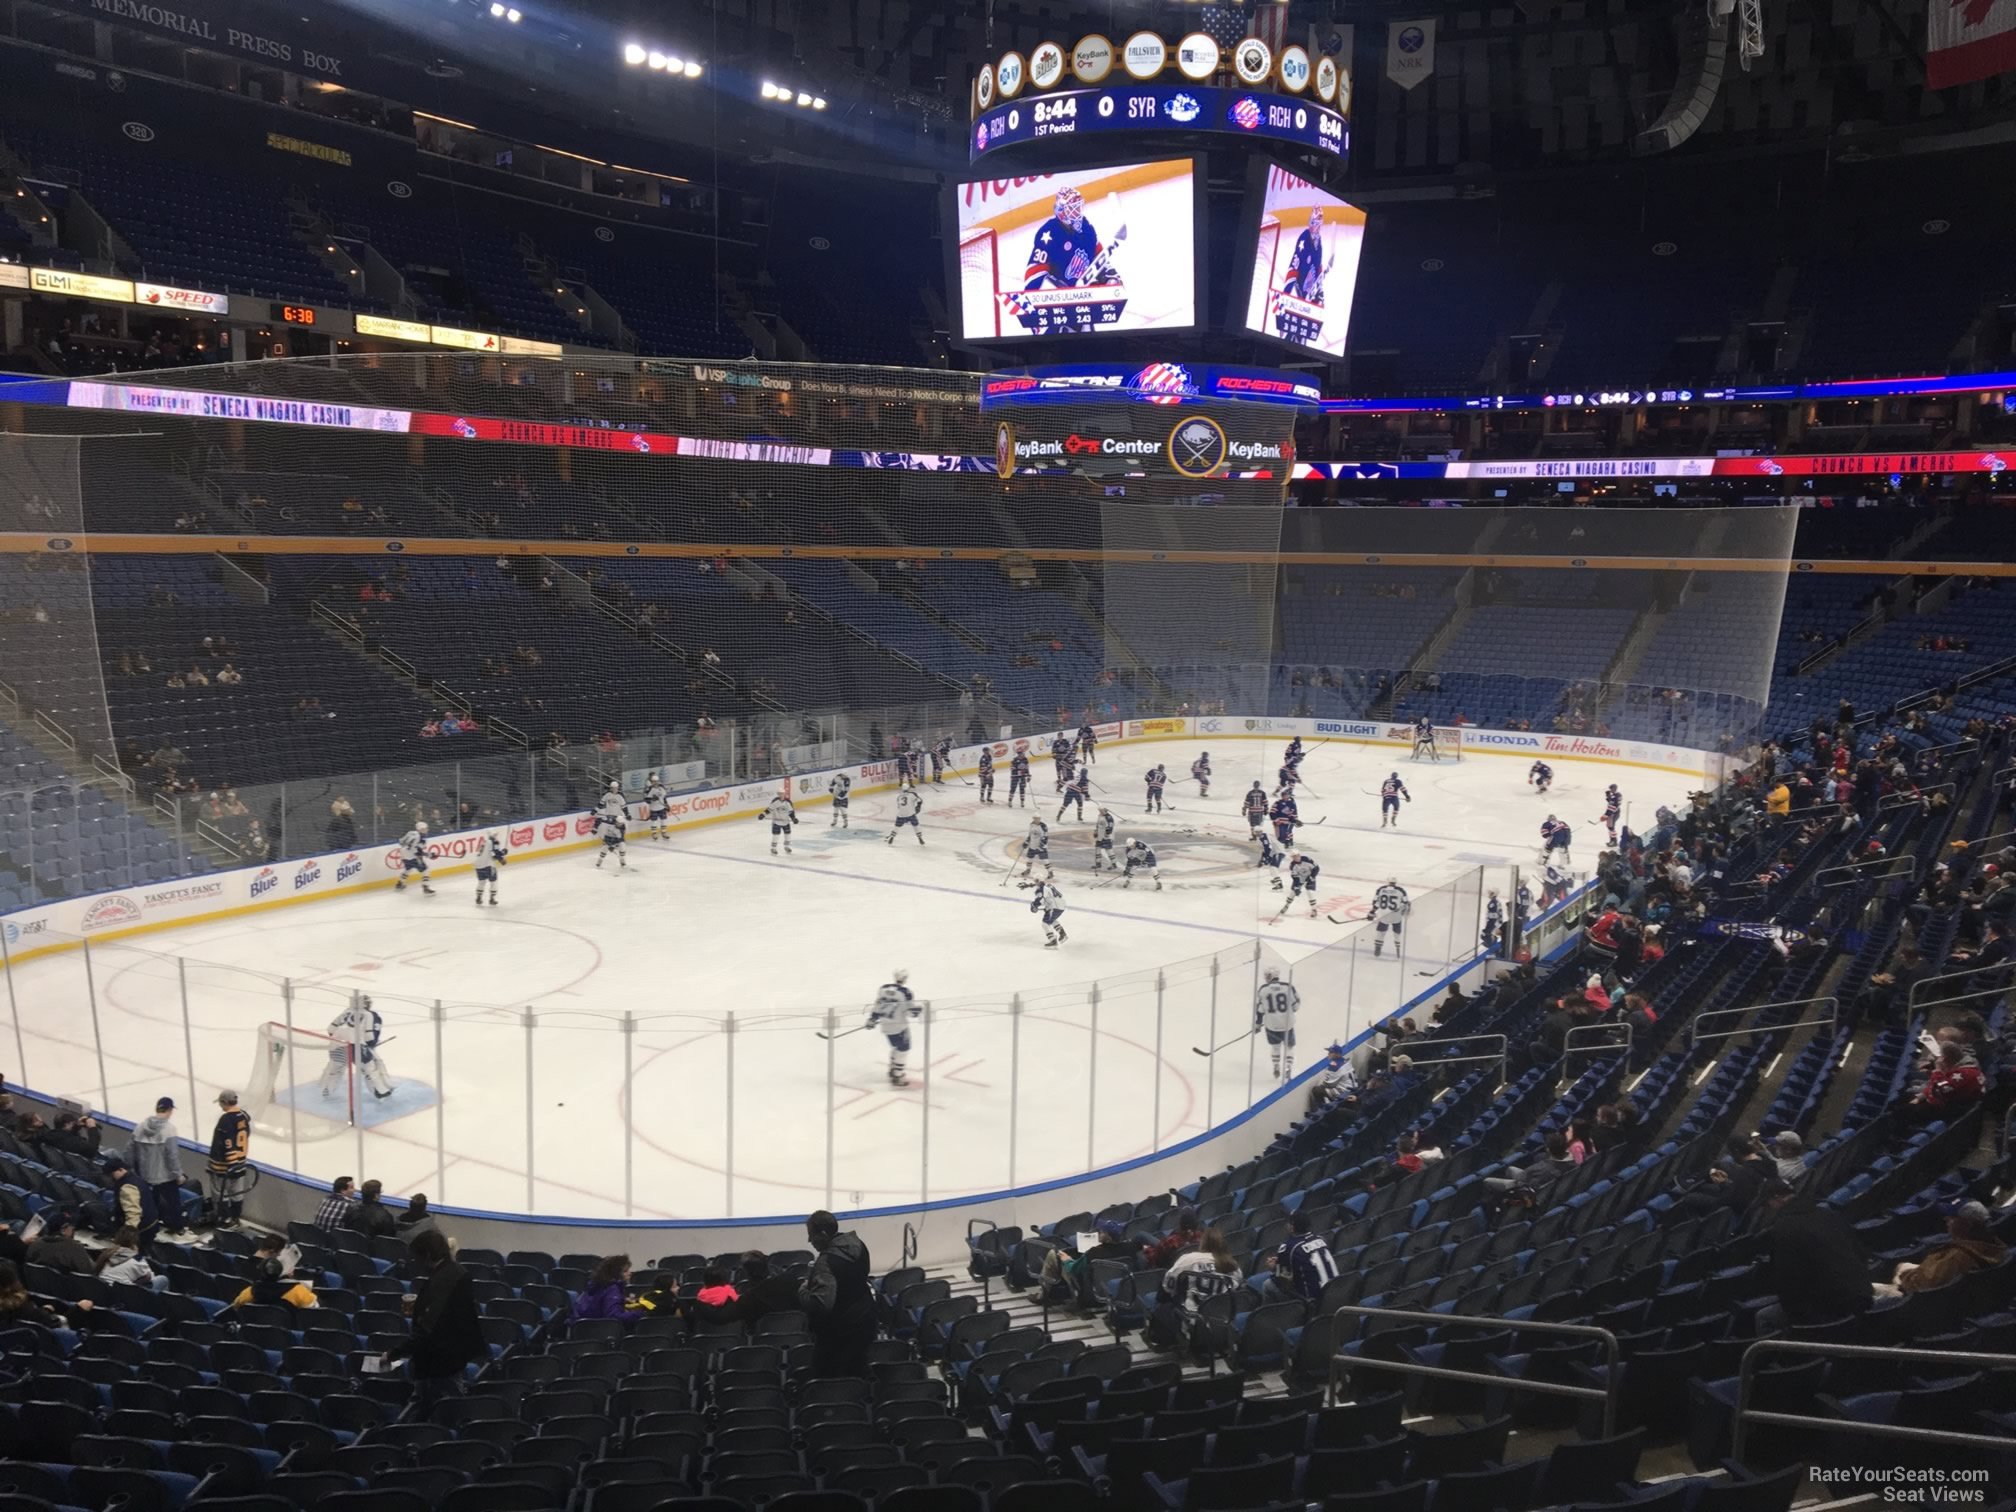 section 109, row 22 seat view  for hockey - keybank center